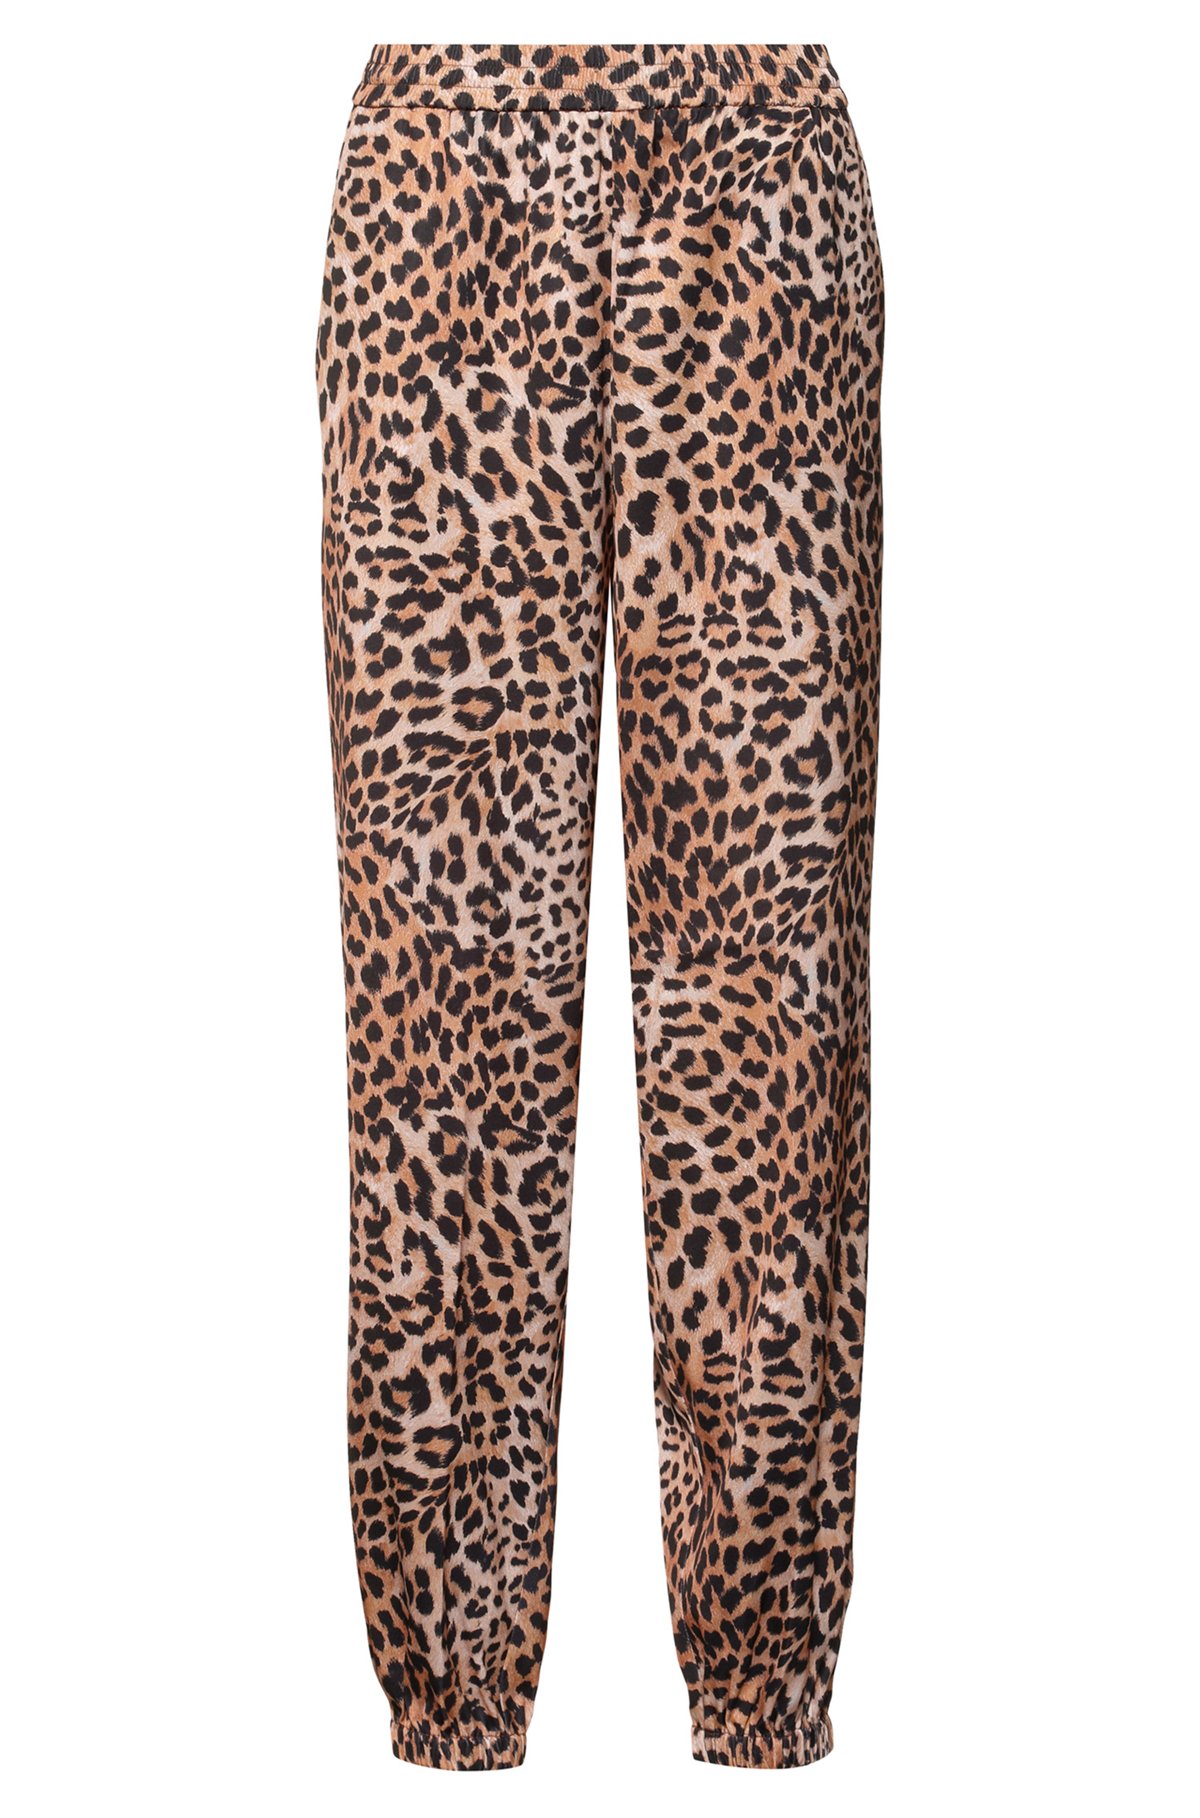 HUGO - Relaxed-fit trousers in leopard print with cuffed hems